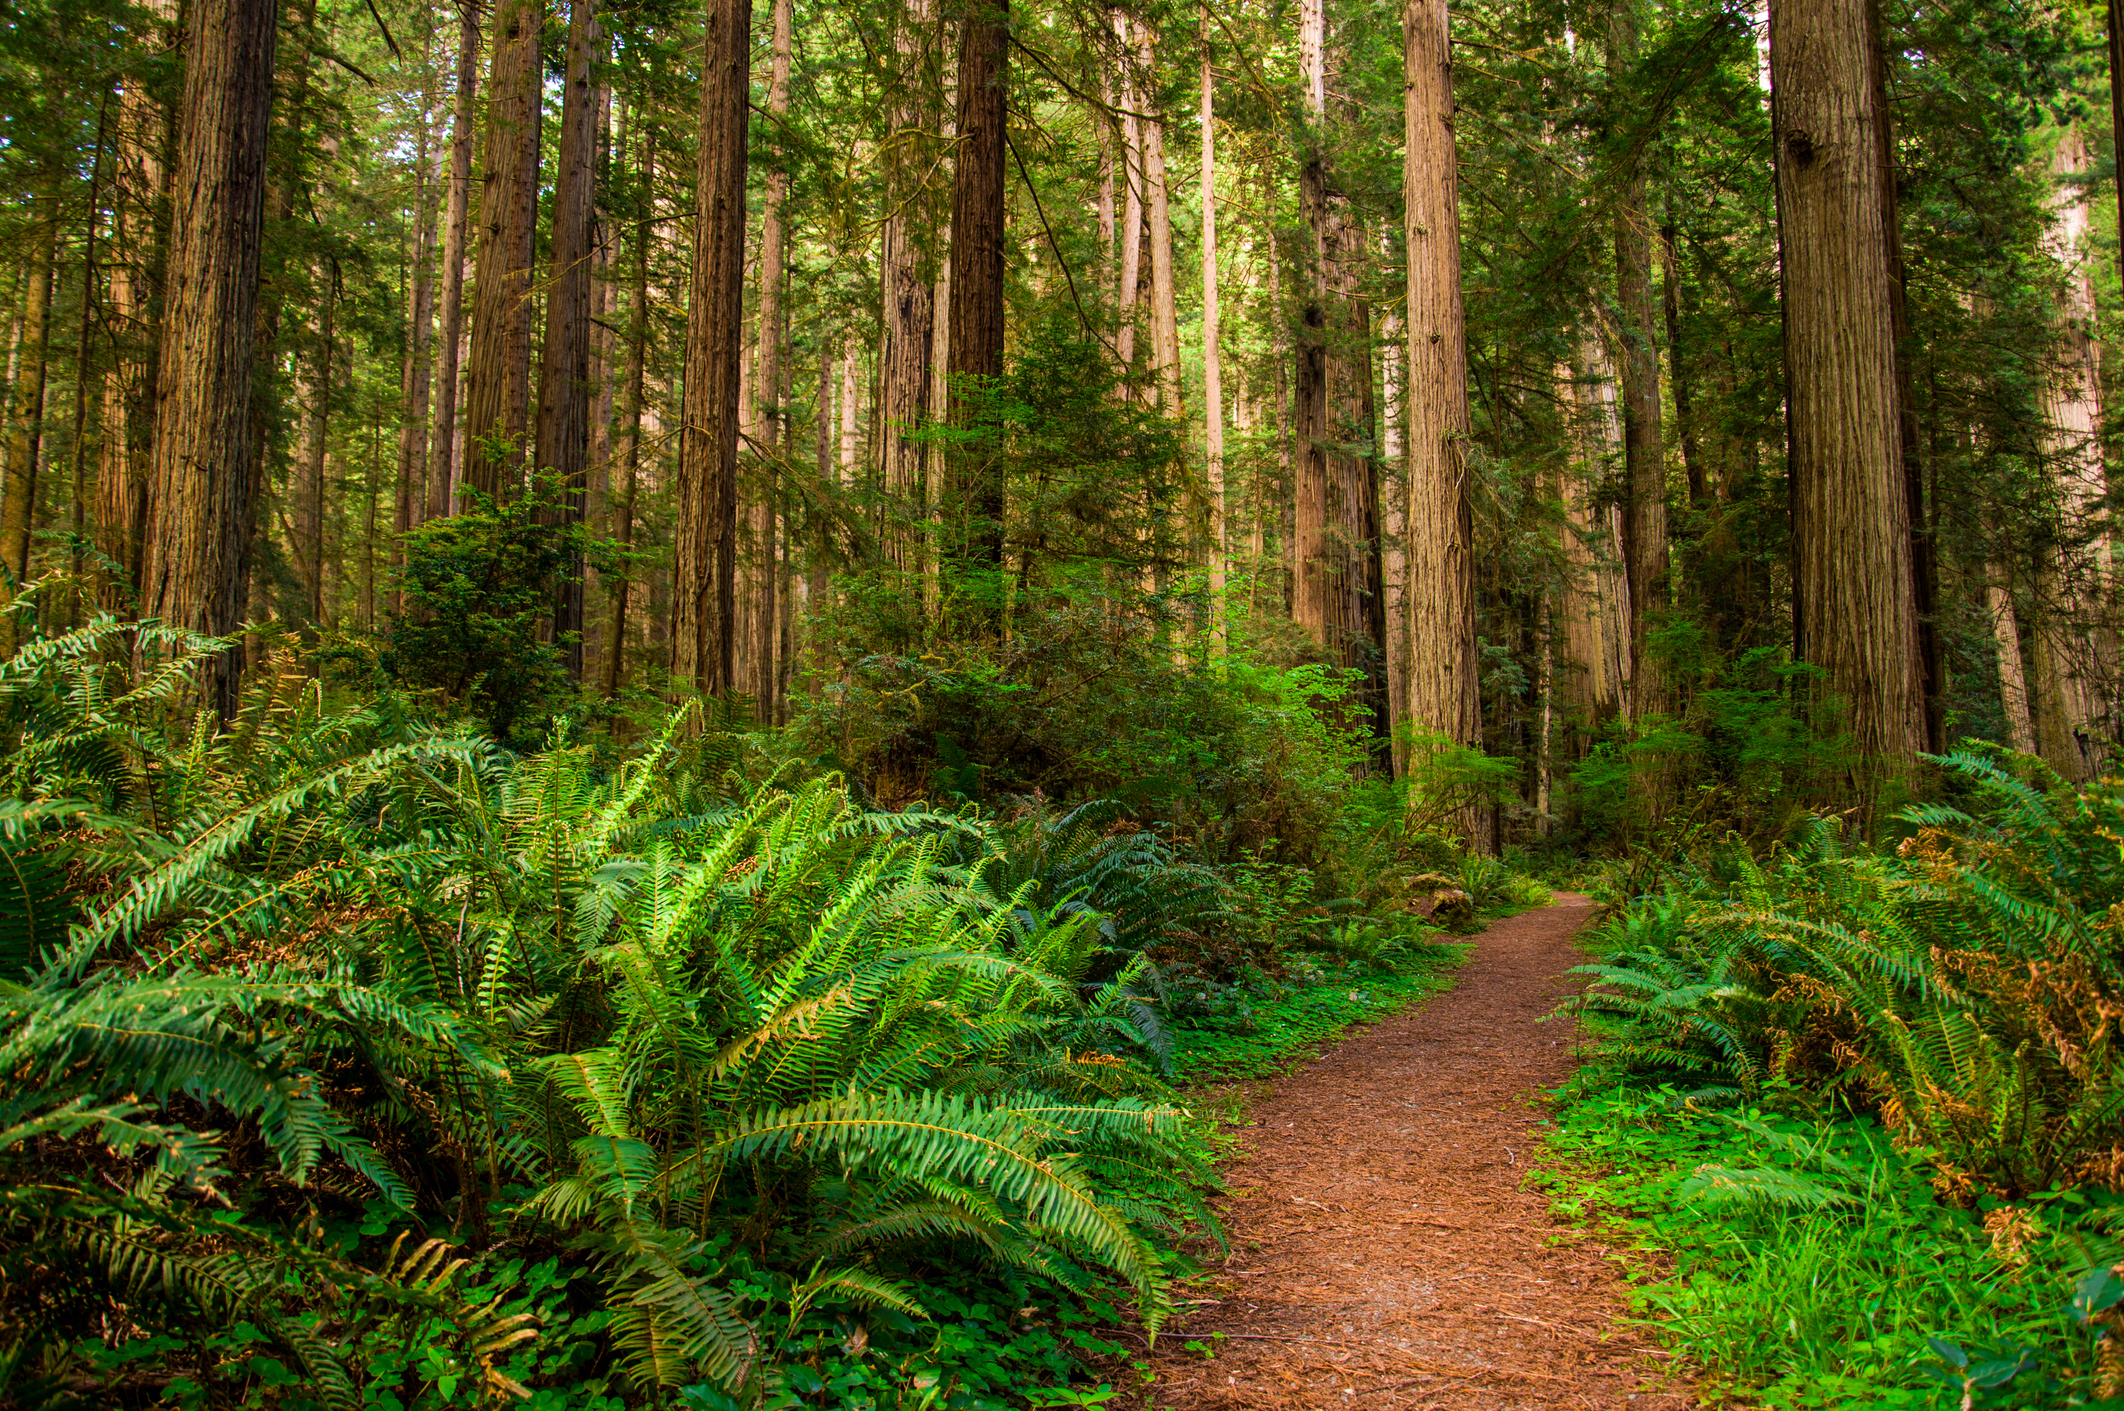 Hiking Path in Redwood Forest